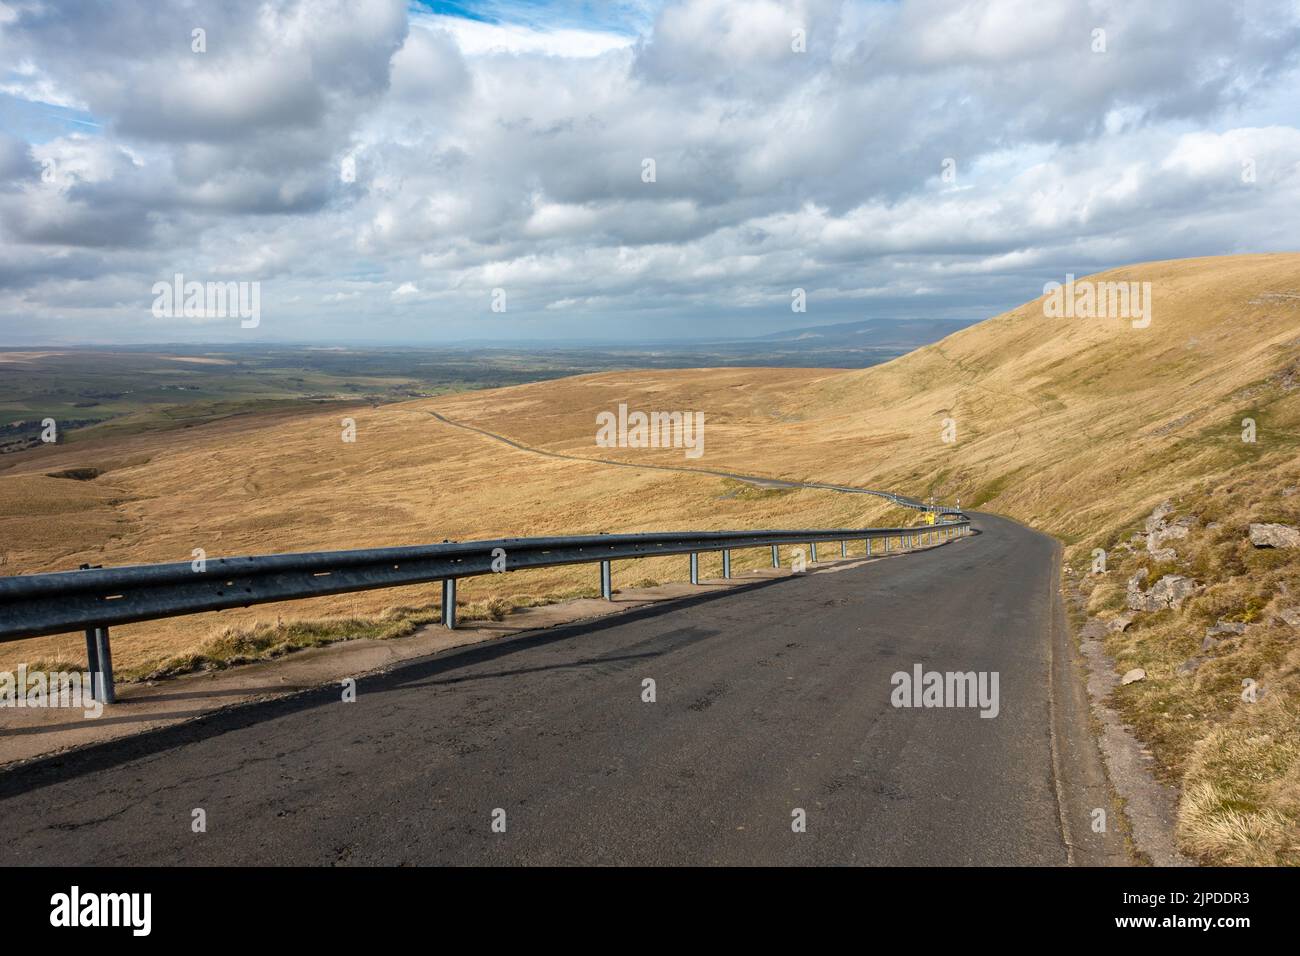 Looking down a famous cycling hill, Lamps Moss, on the B6270 road above Nateby, Yorkshire Dales National Park, England, UK landscapes Stock Photo